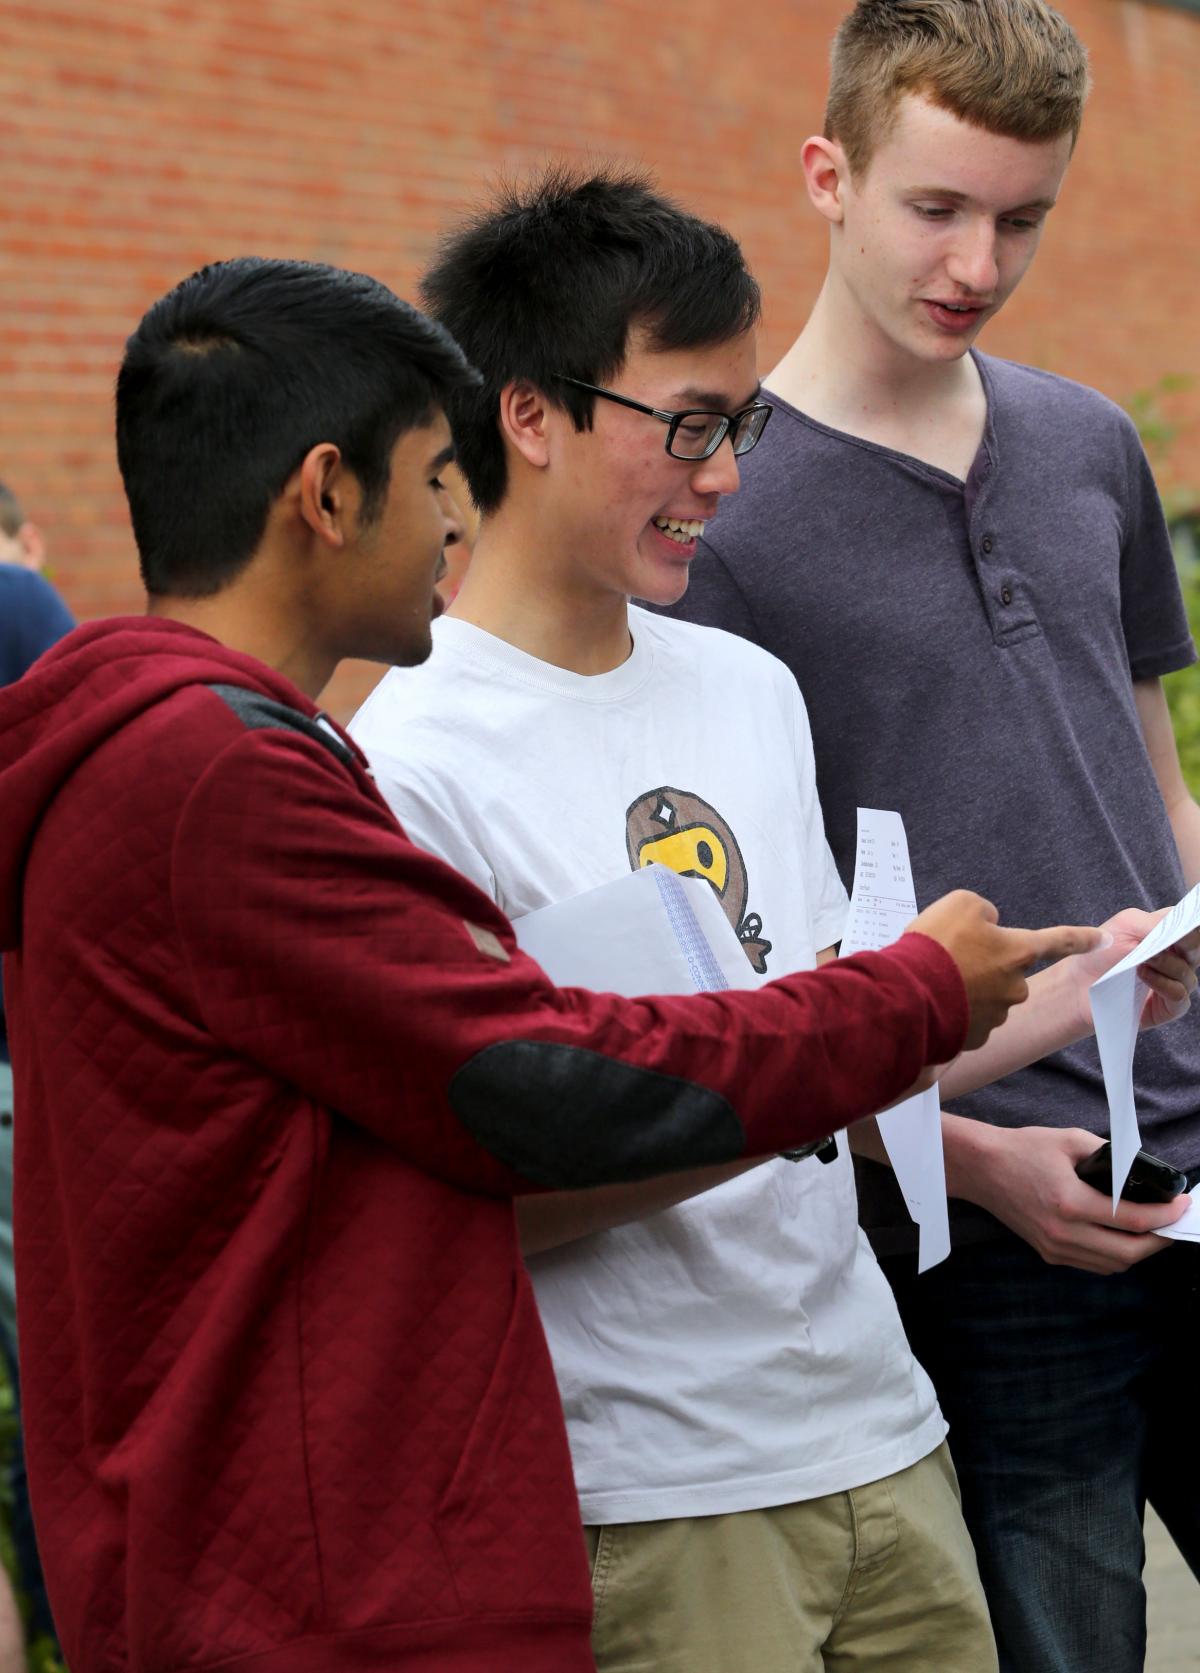 A Level results day 2014 at Poole Grammar School 